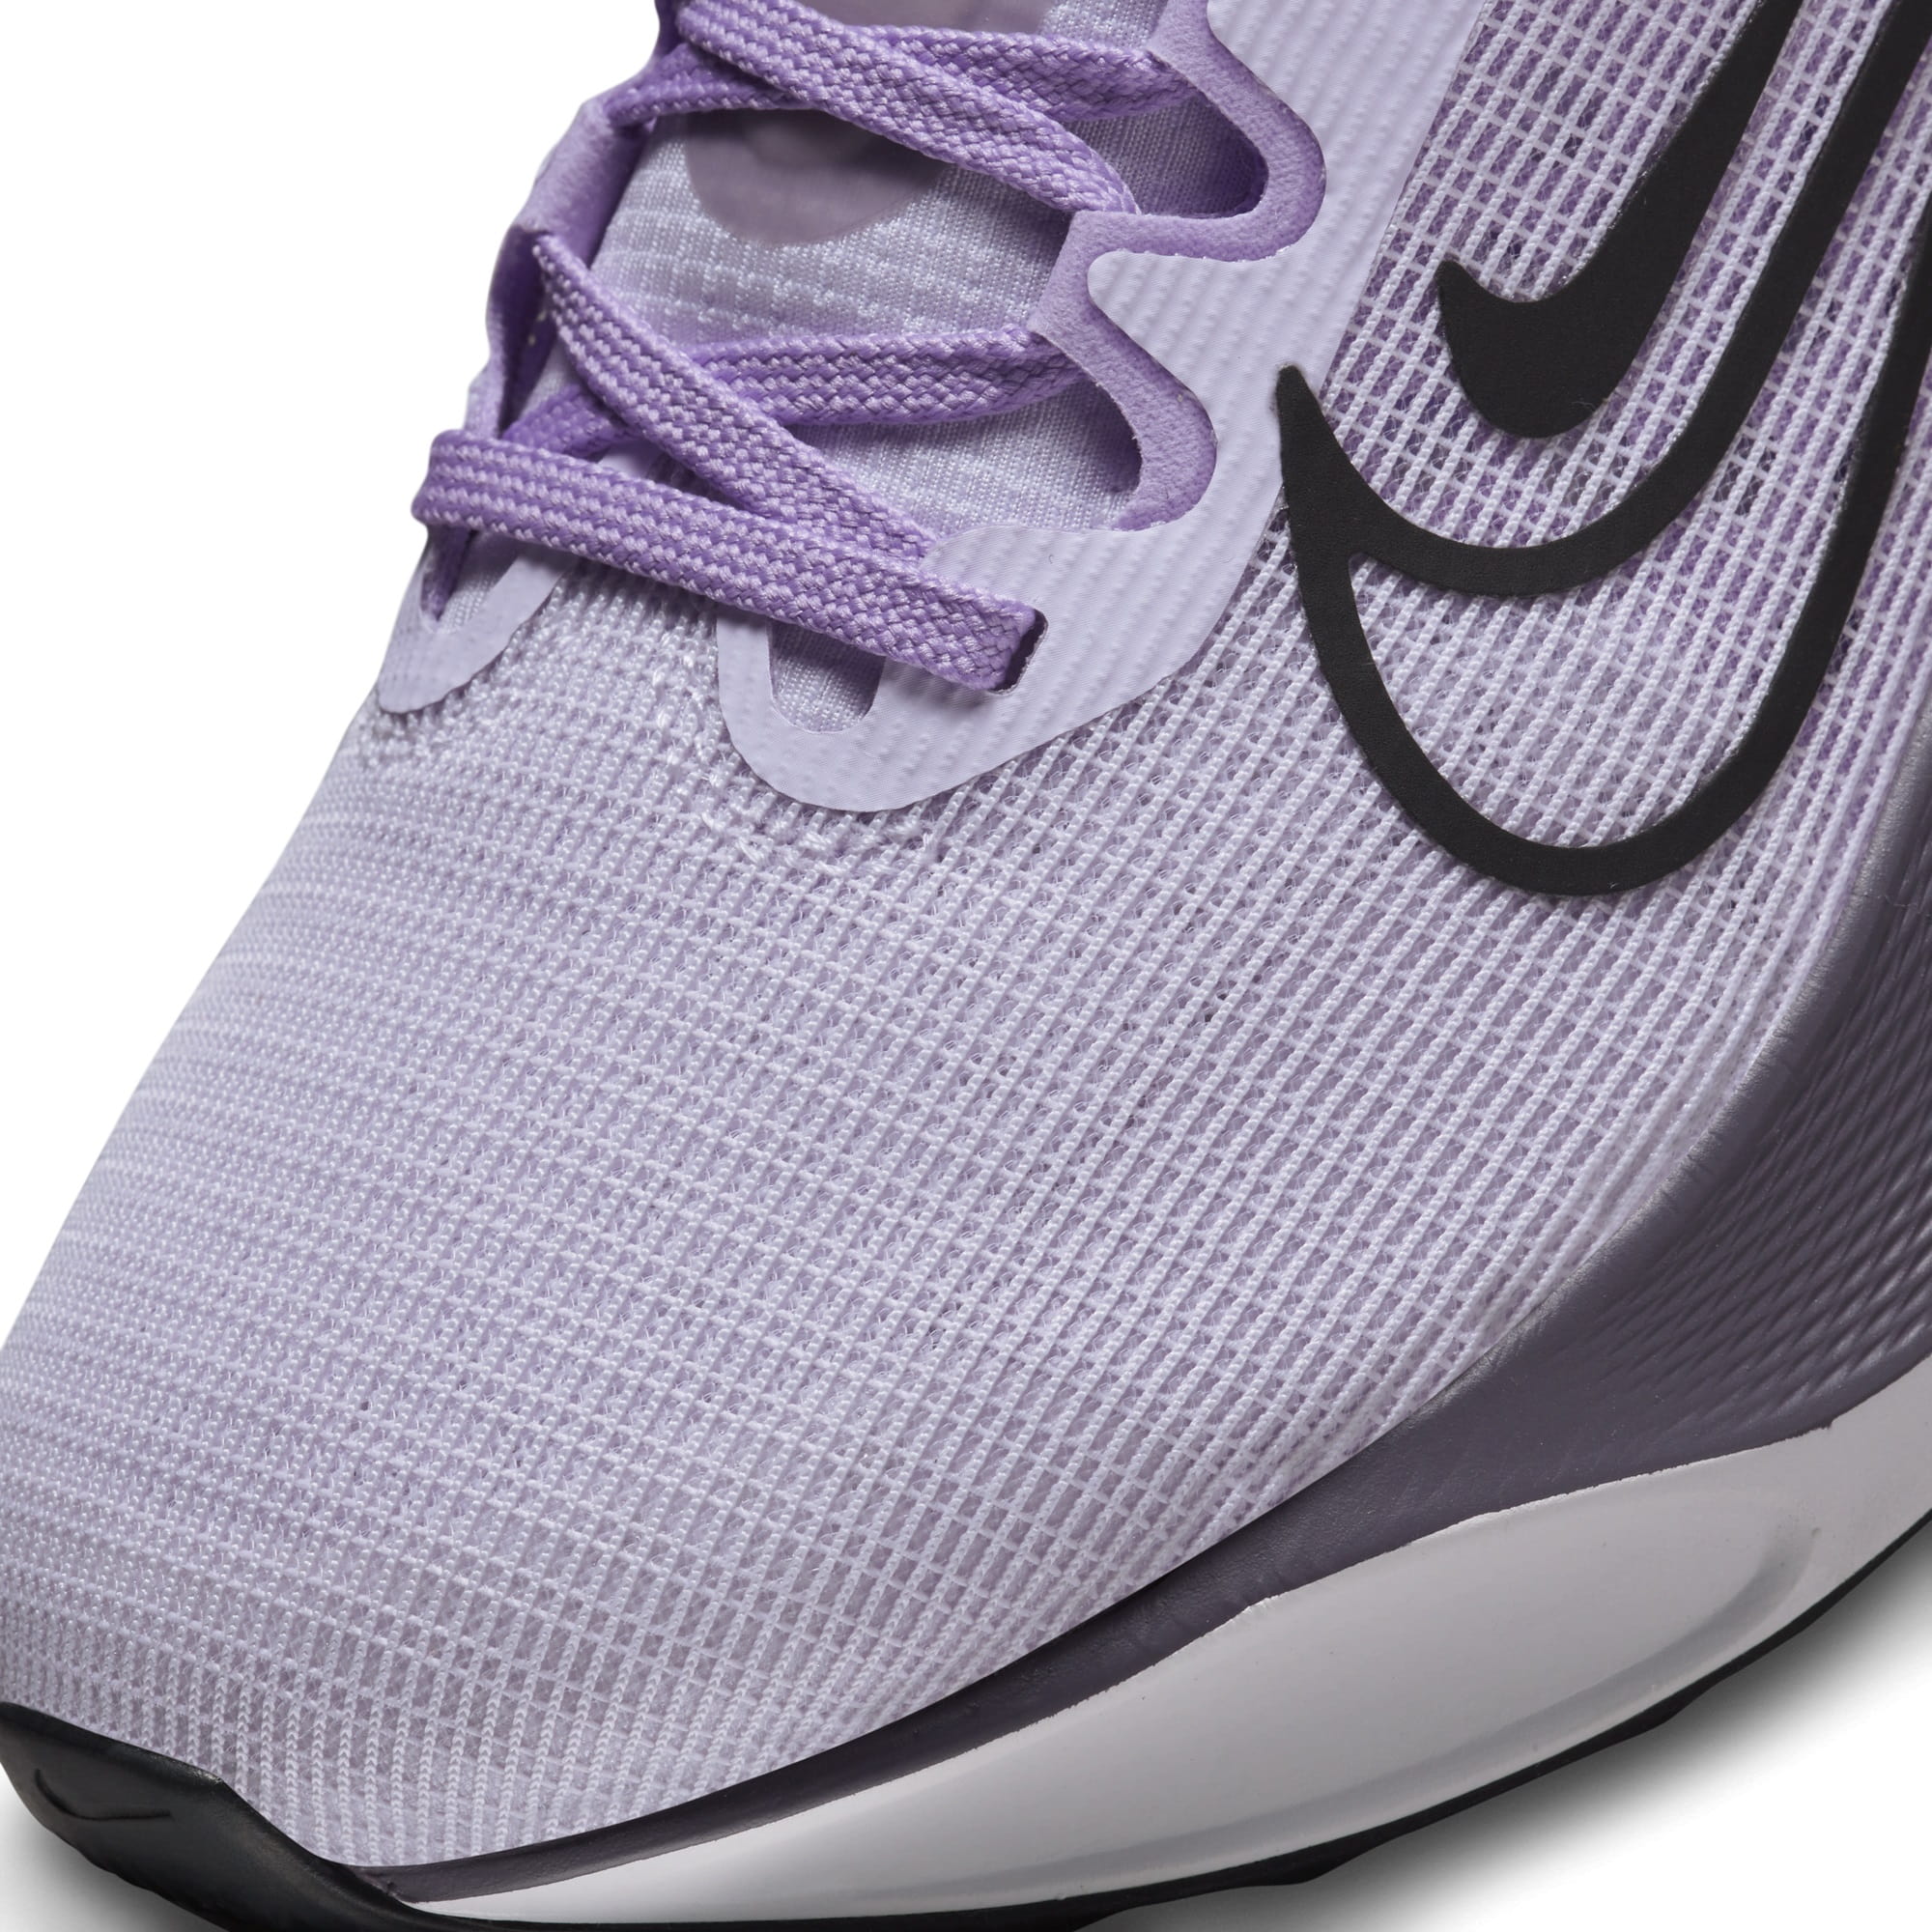 GIÀY NIKE NỮ ZOOM FLY 5 WOMEN ROAD RUNNING SHOES BARELY GRAPE DM8974-500 9